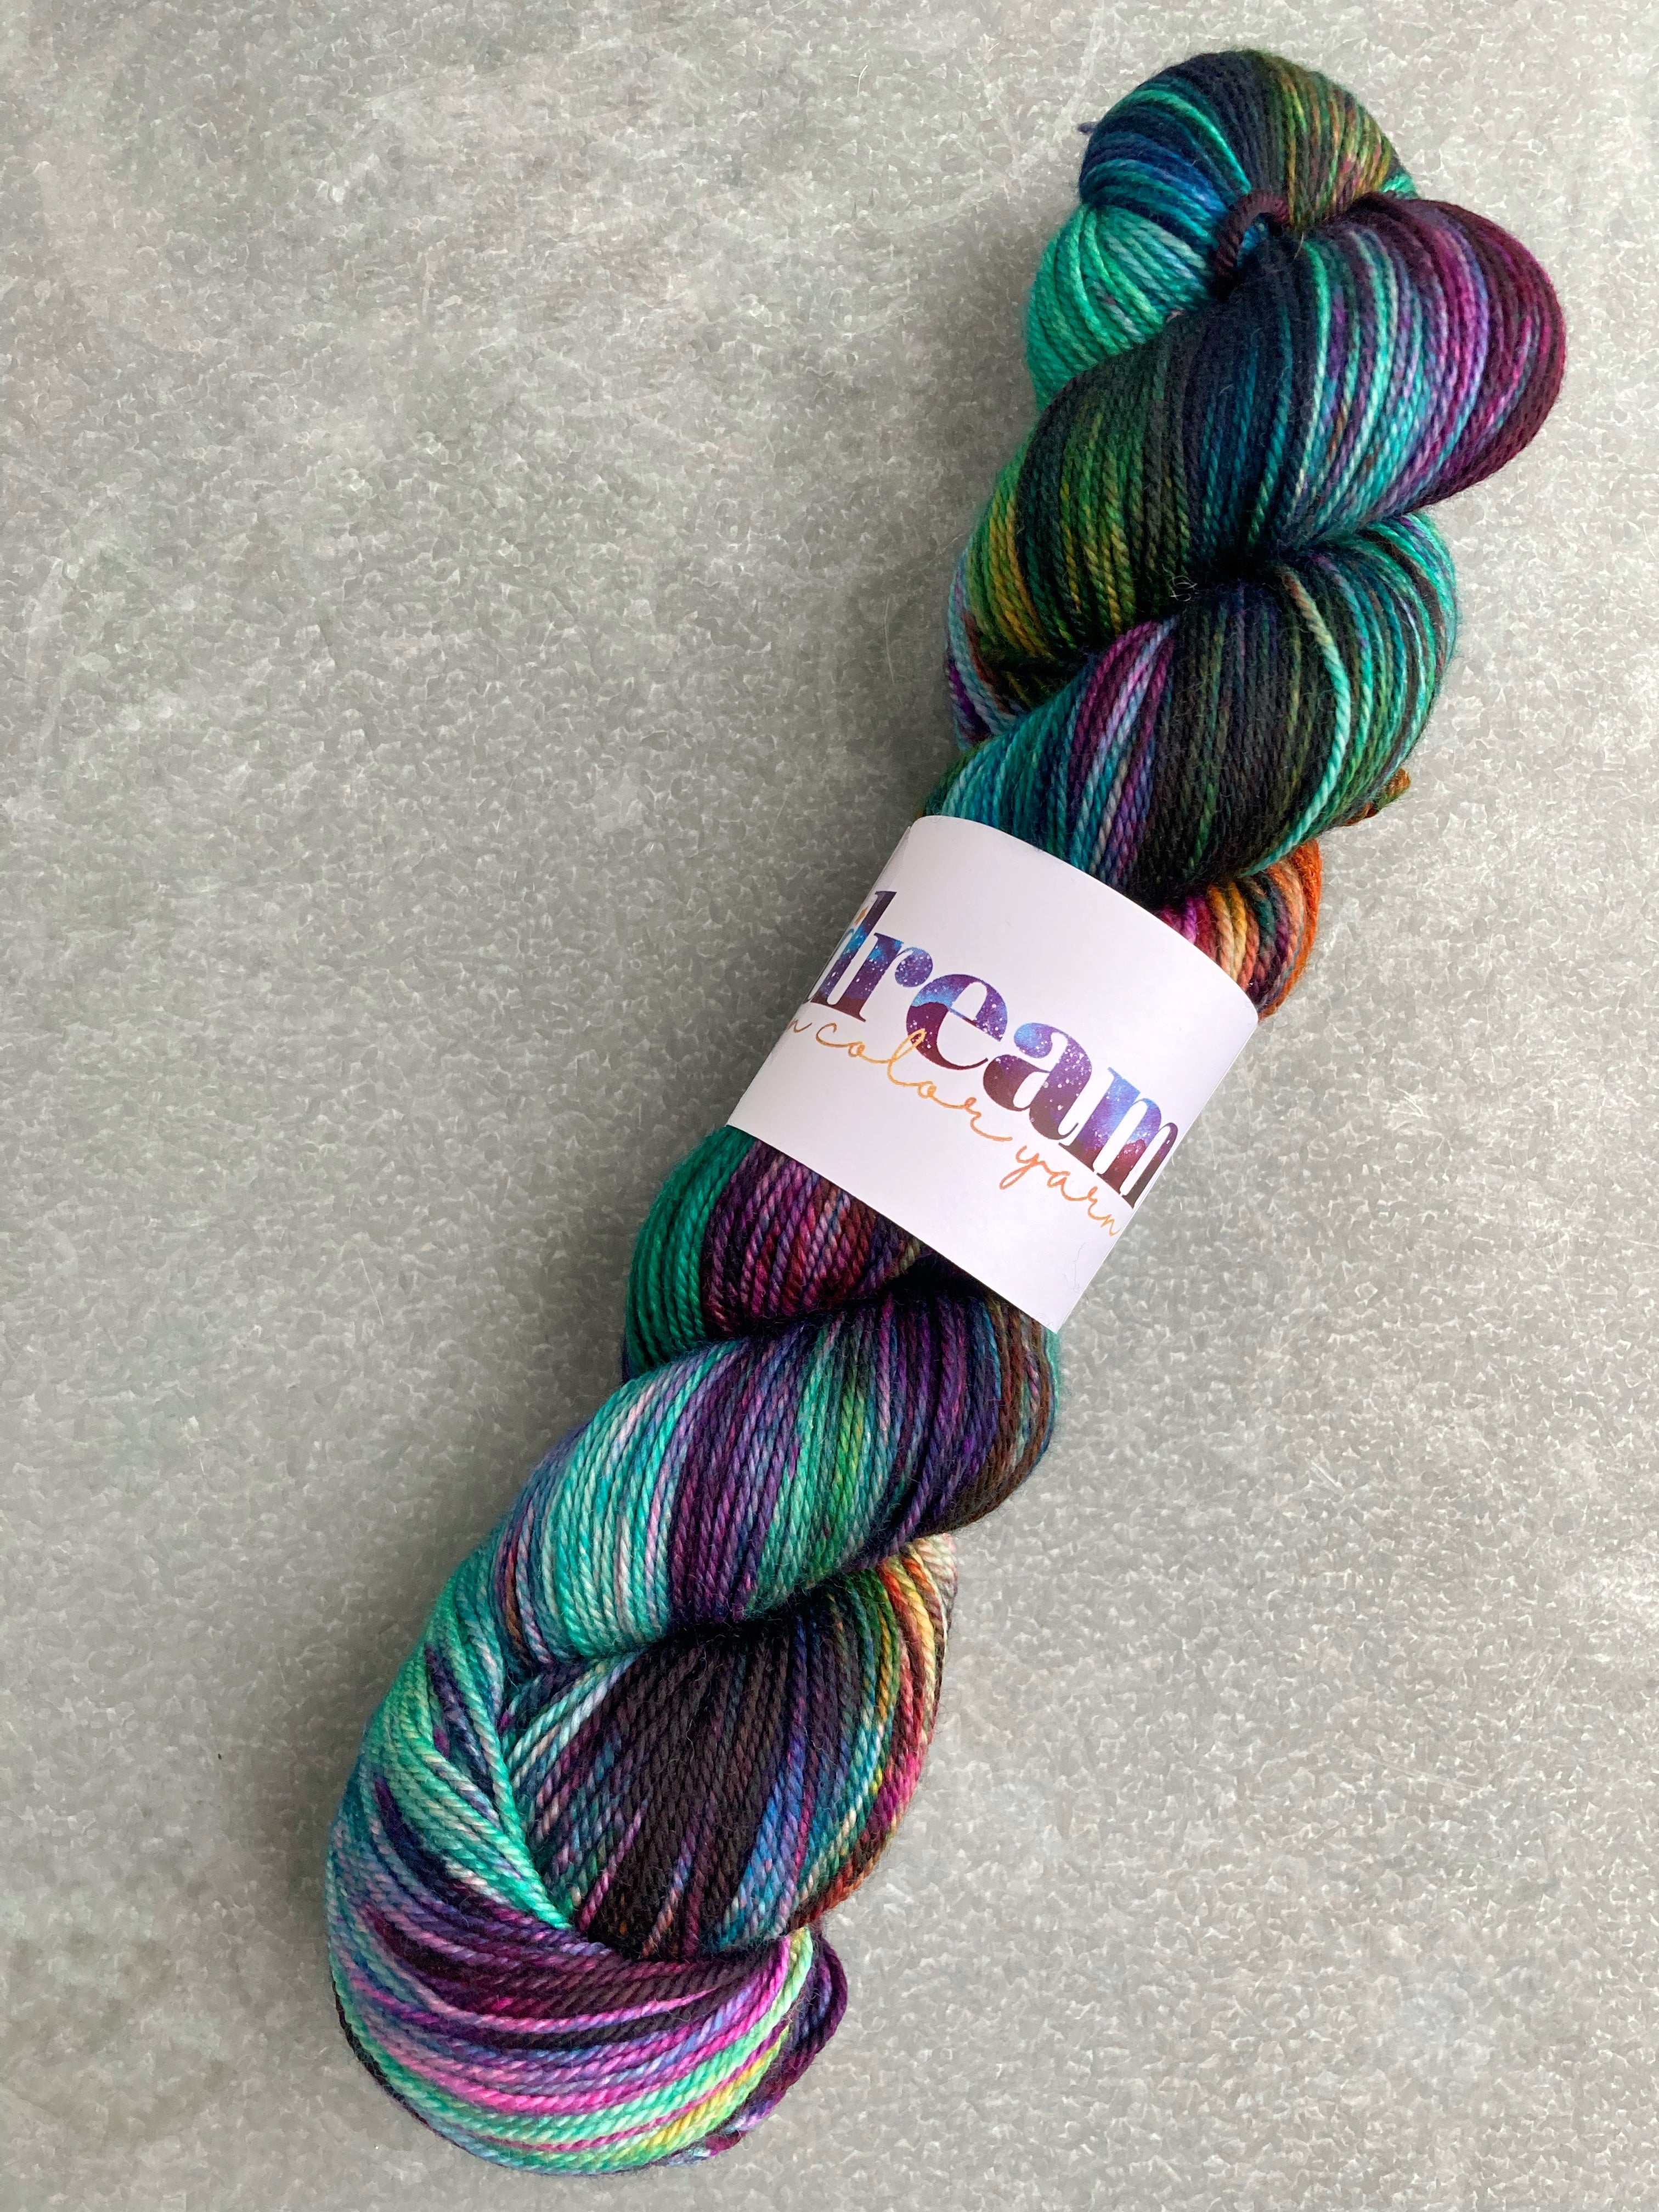 Smooshy Cashmere yarn from Dream in Color